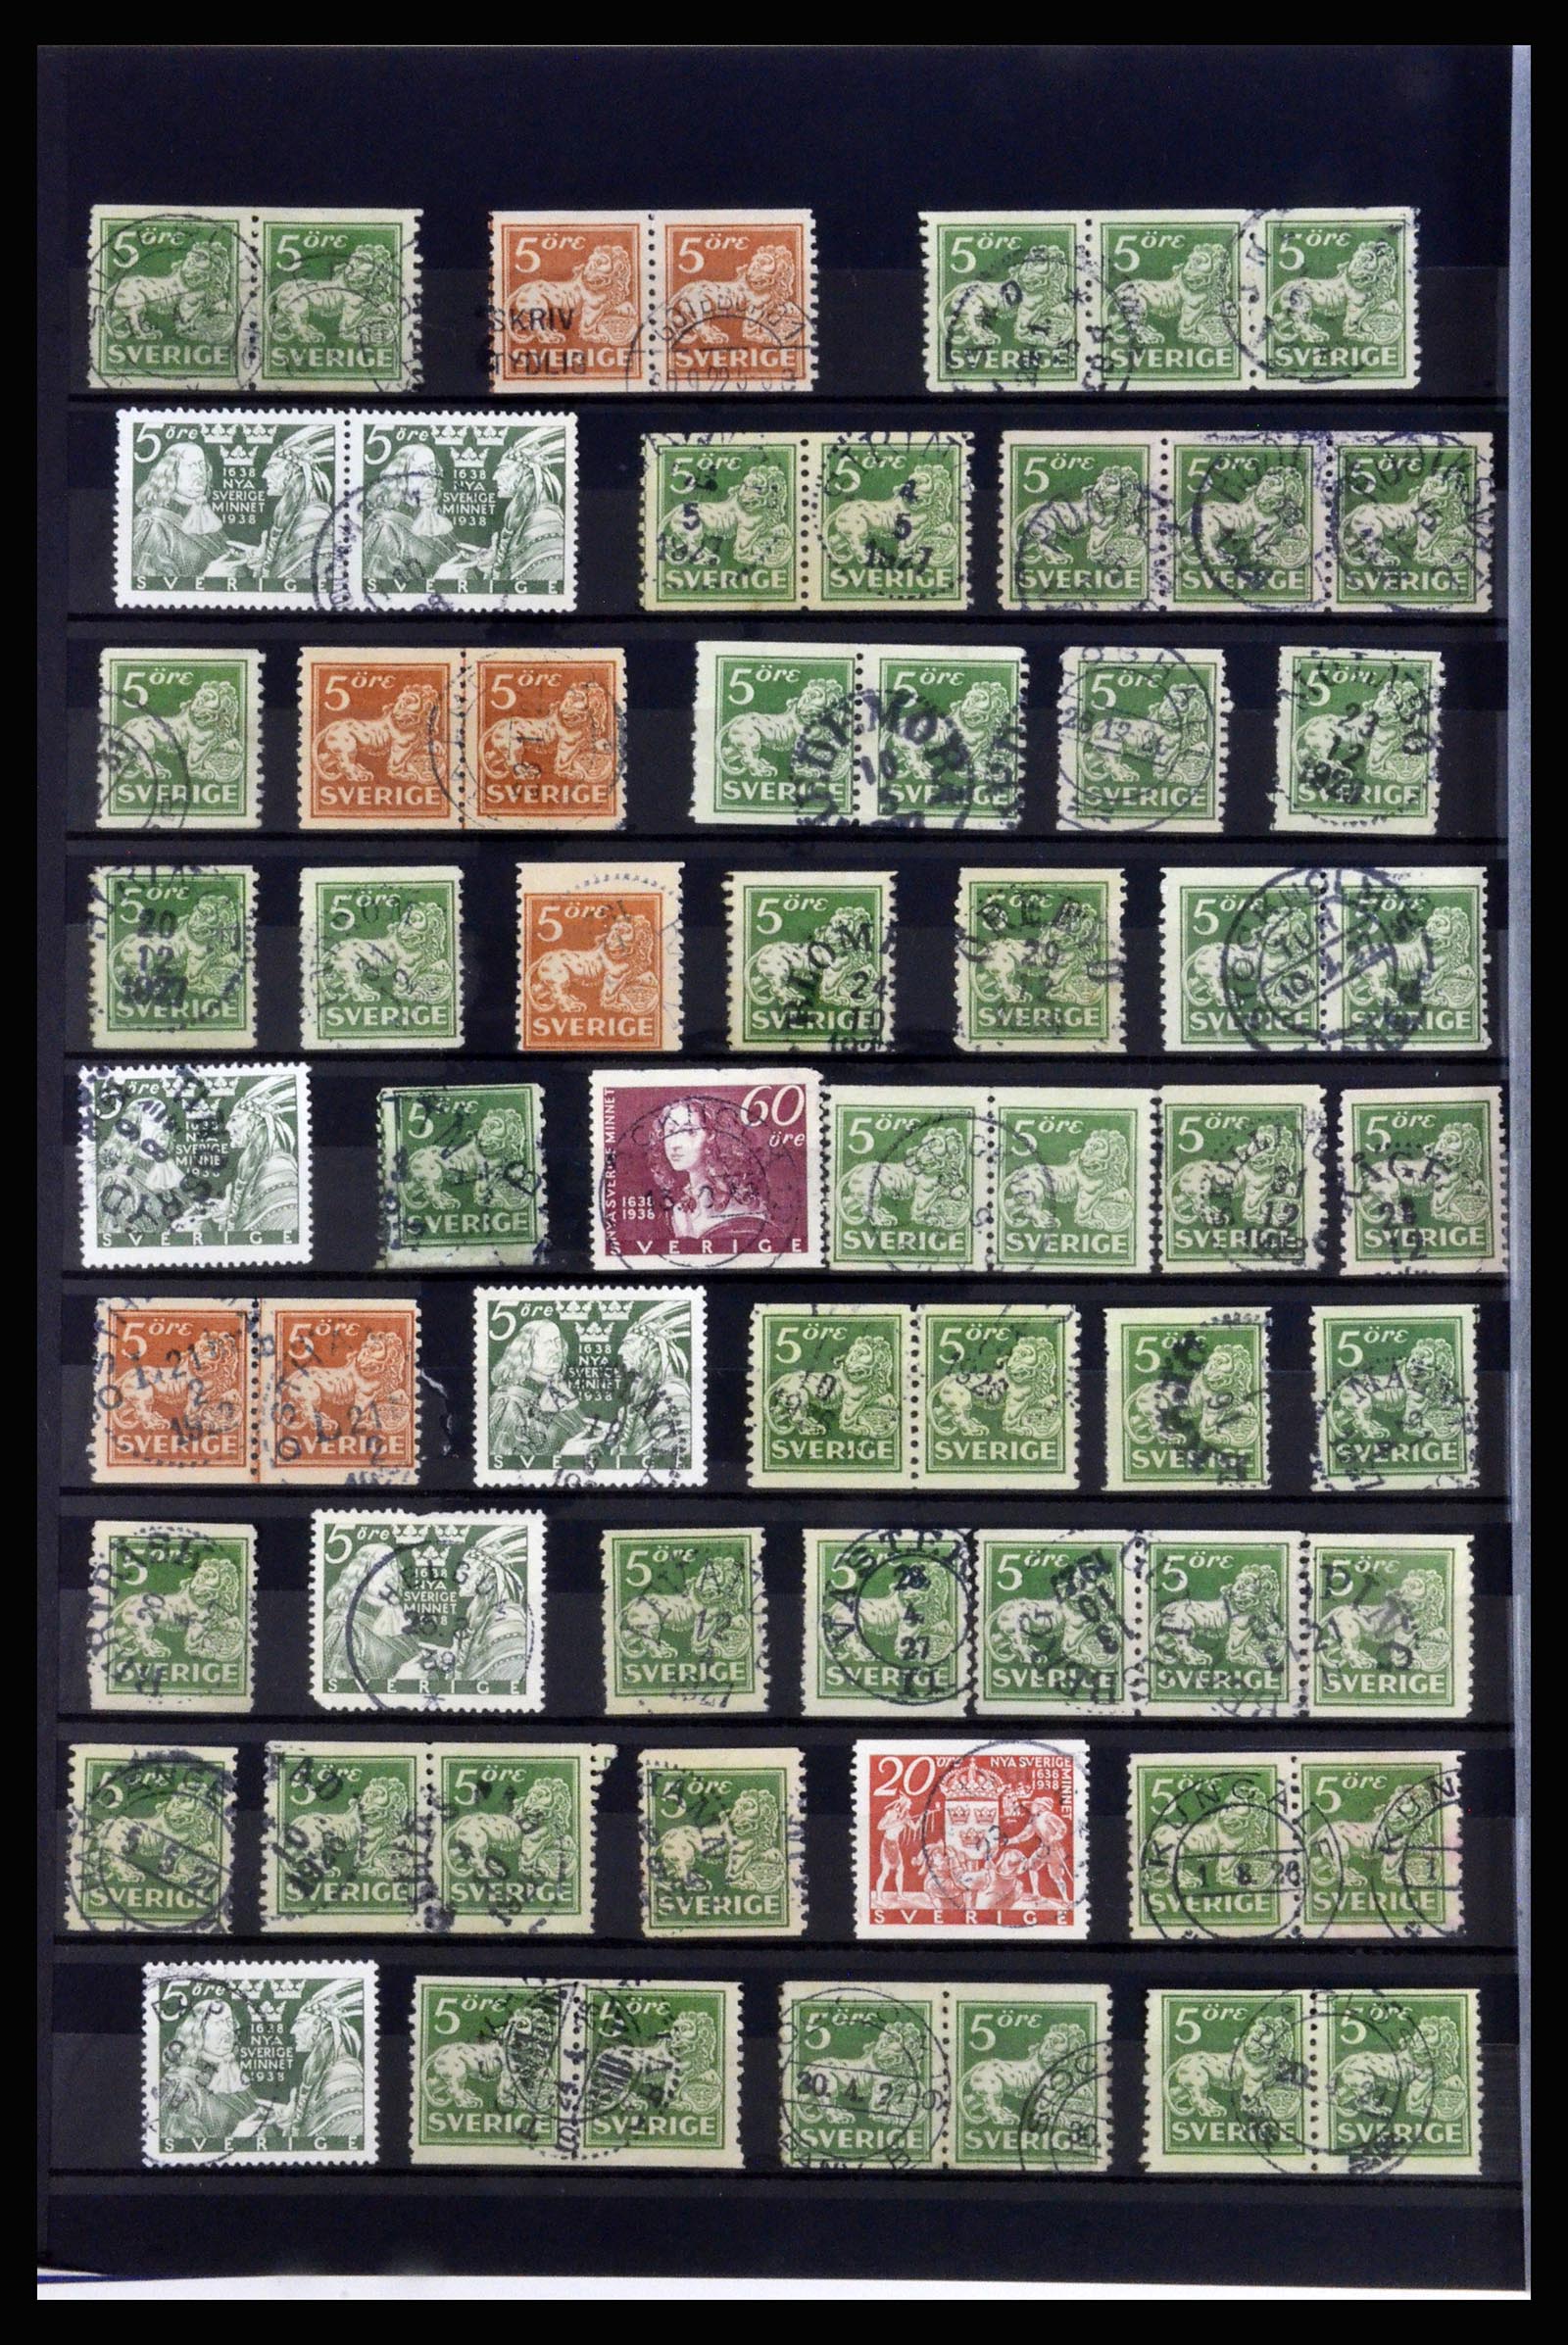 36316 030 - Stamp collection 36316 Sweden cancellations 1920-1938.